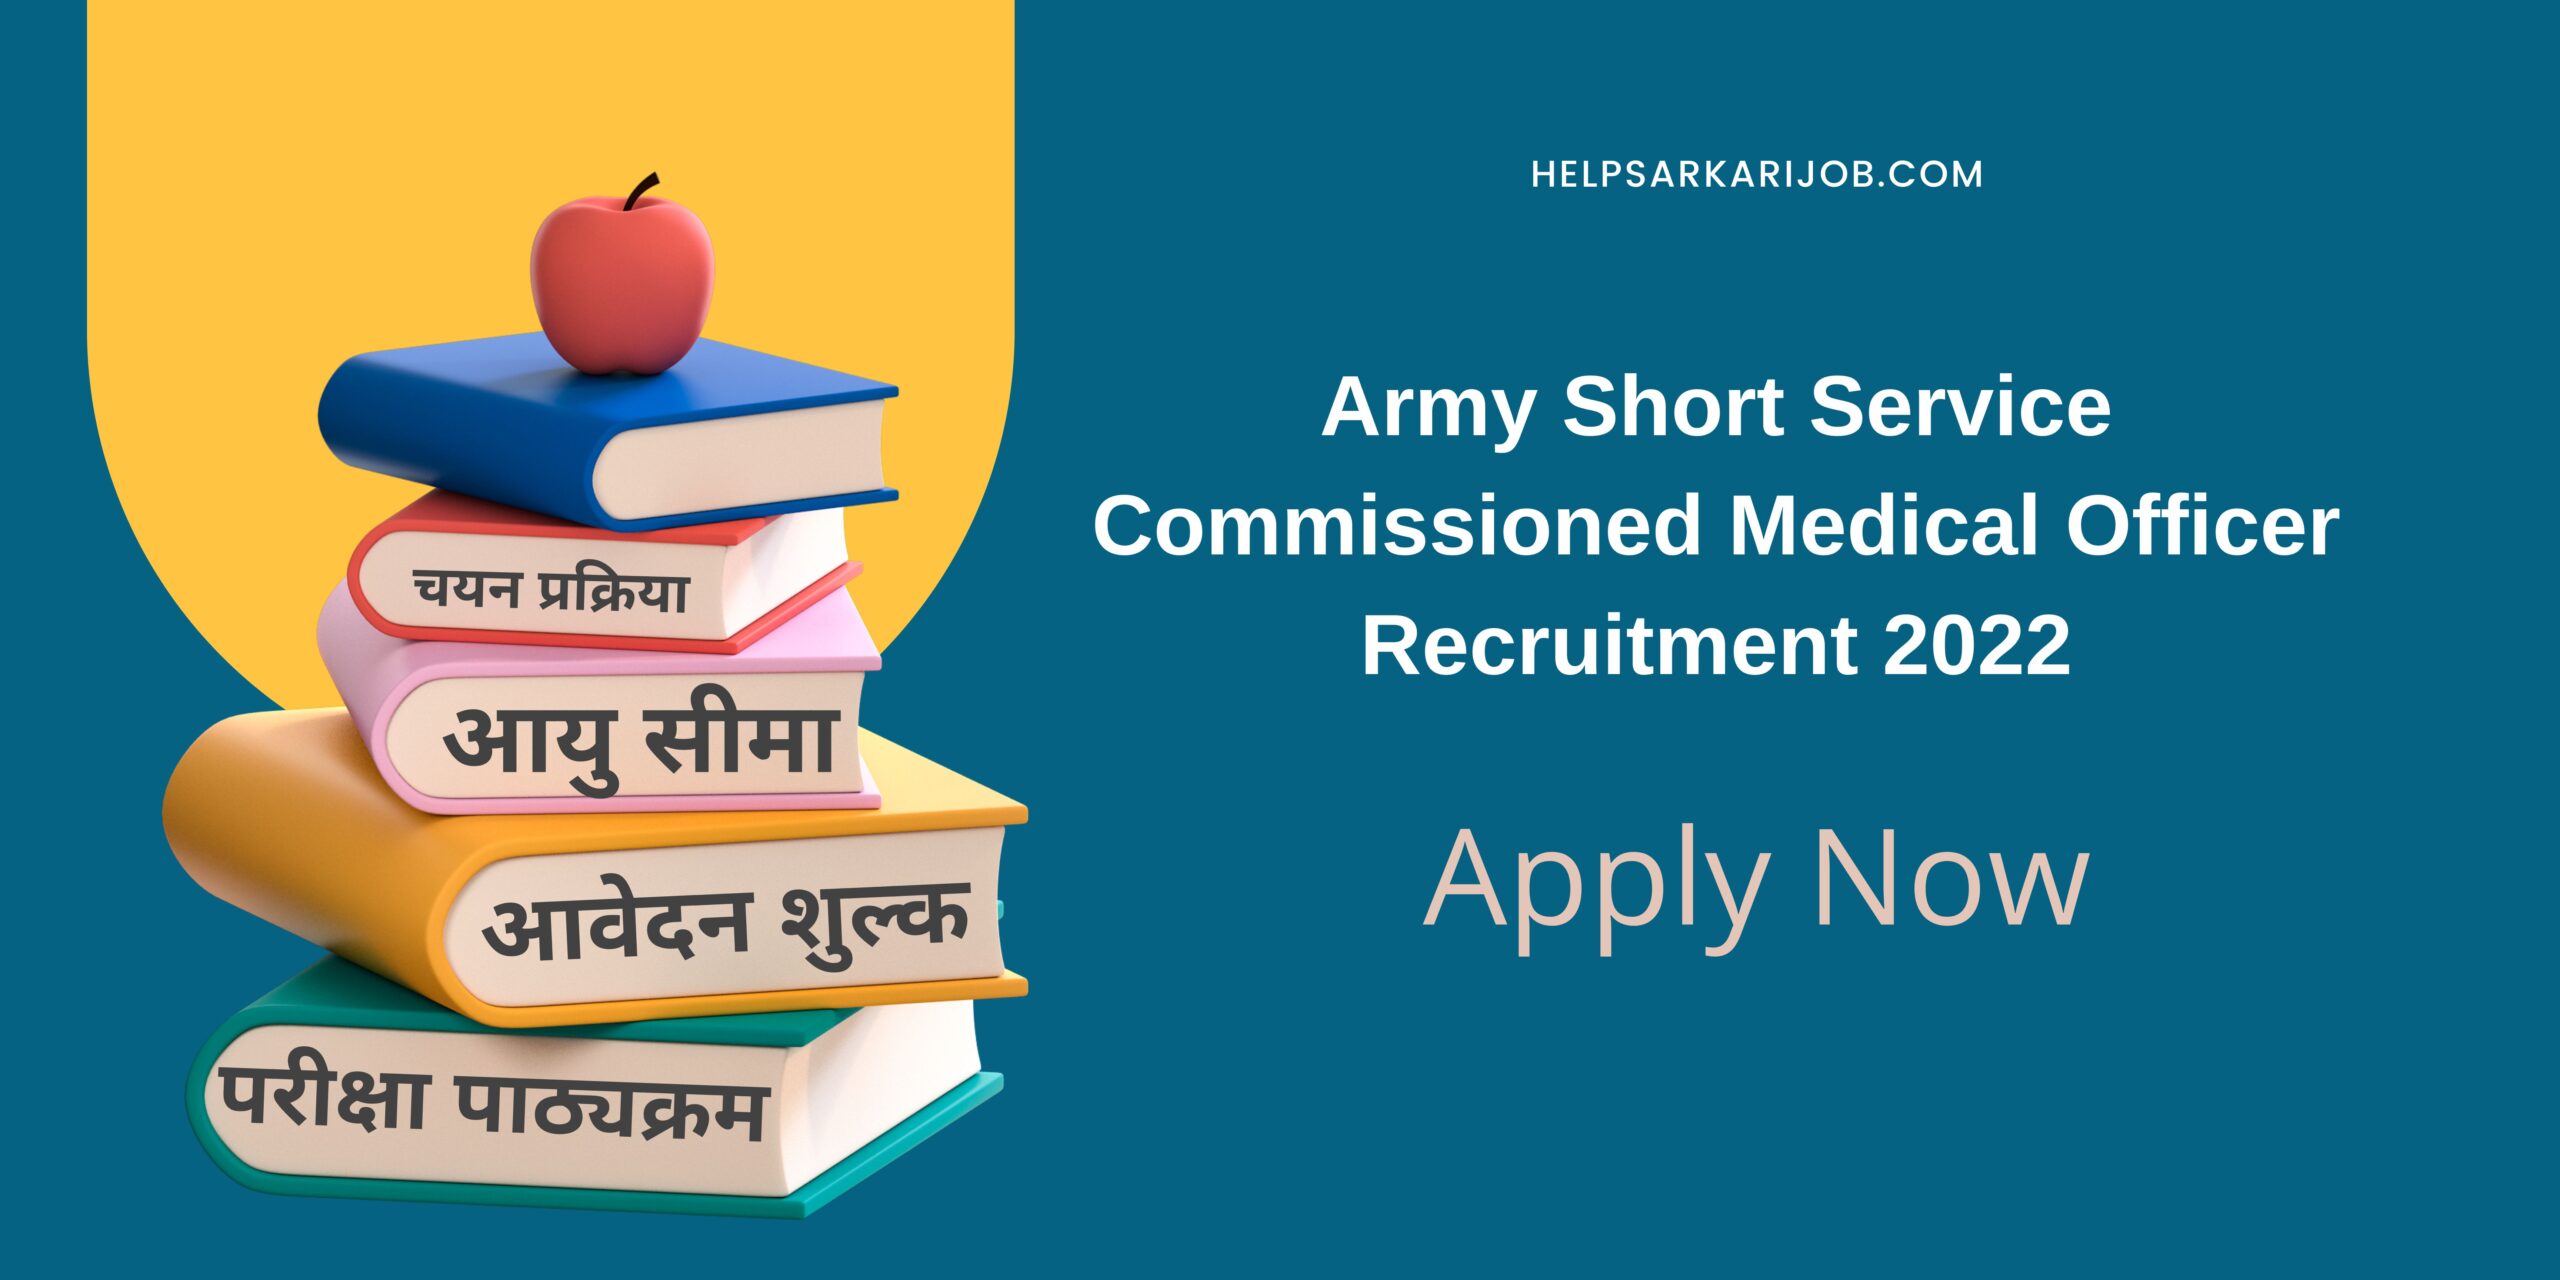 Army Short Service Commissioned Medical Officer Recruitment 2022